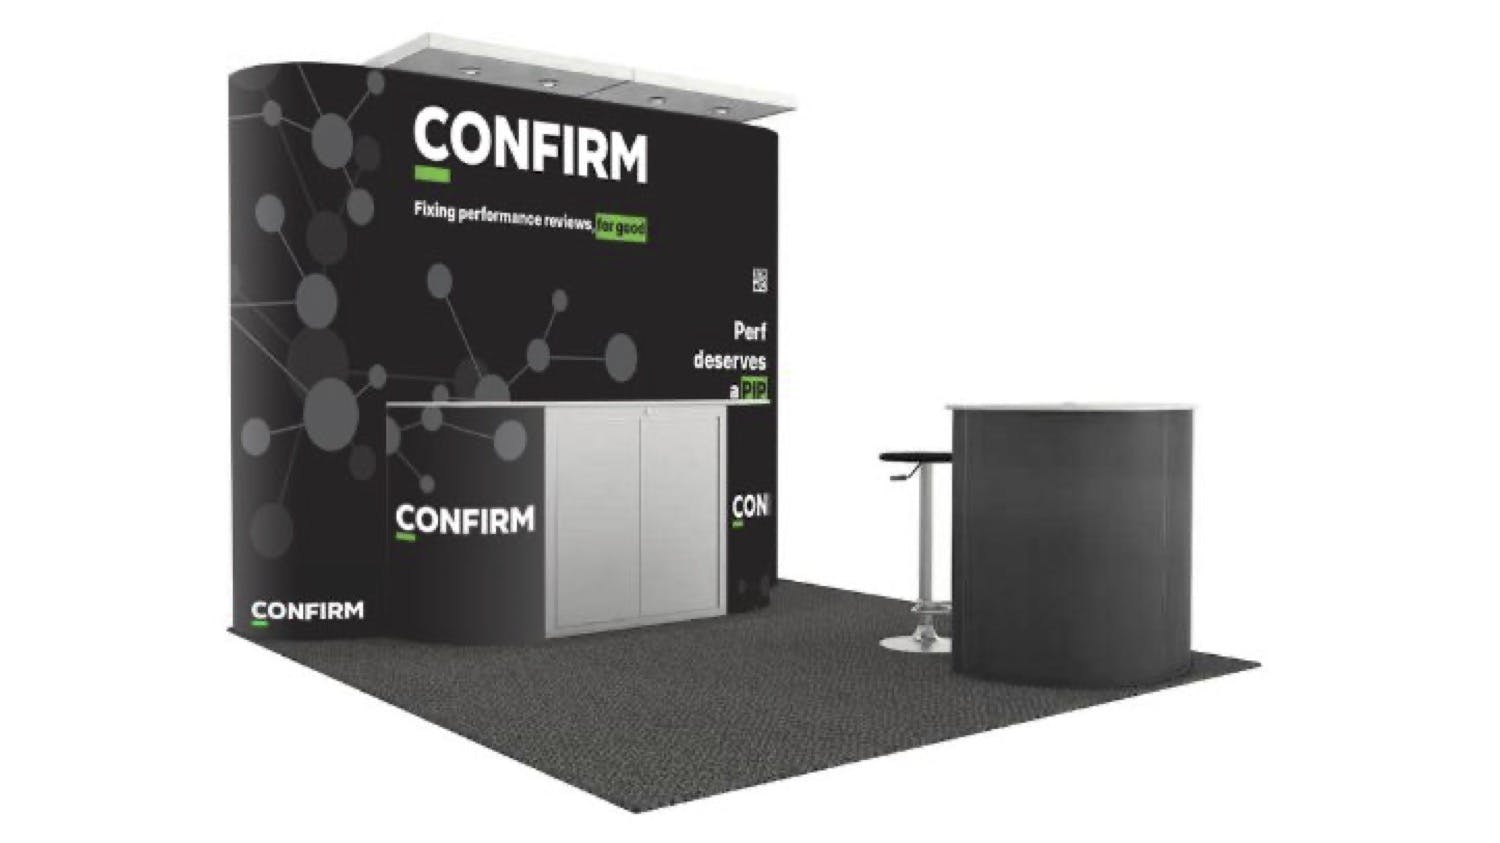 A booth with Confirm branding